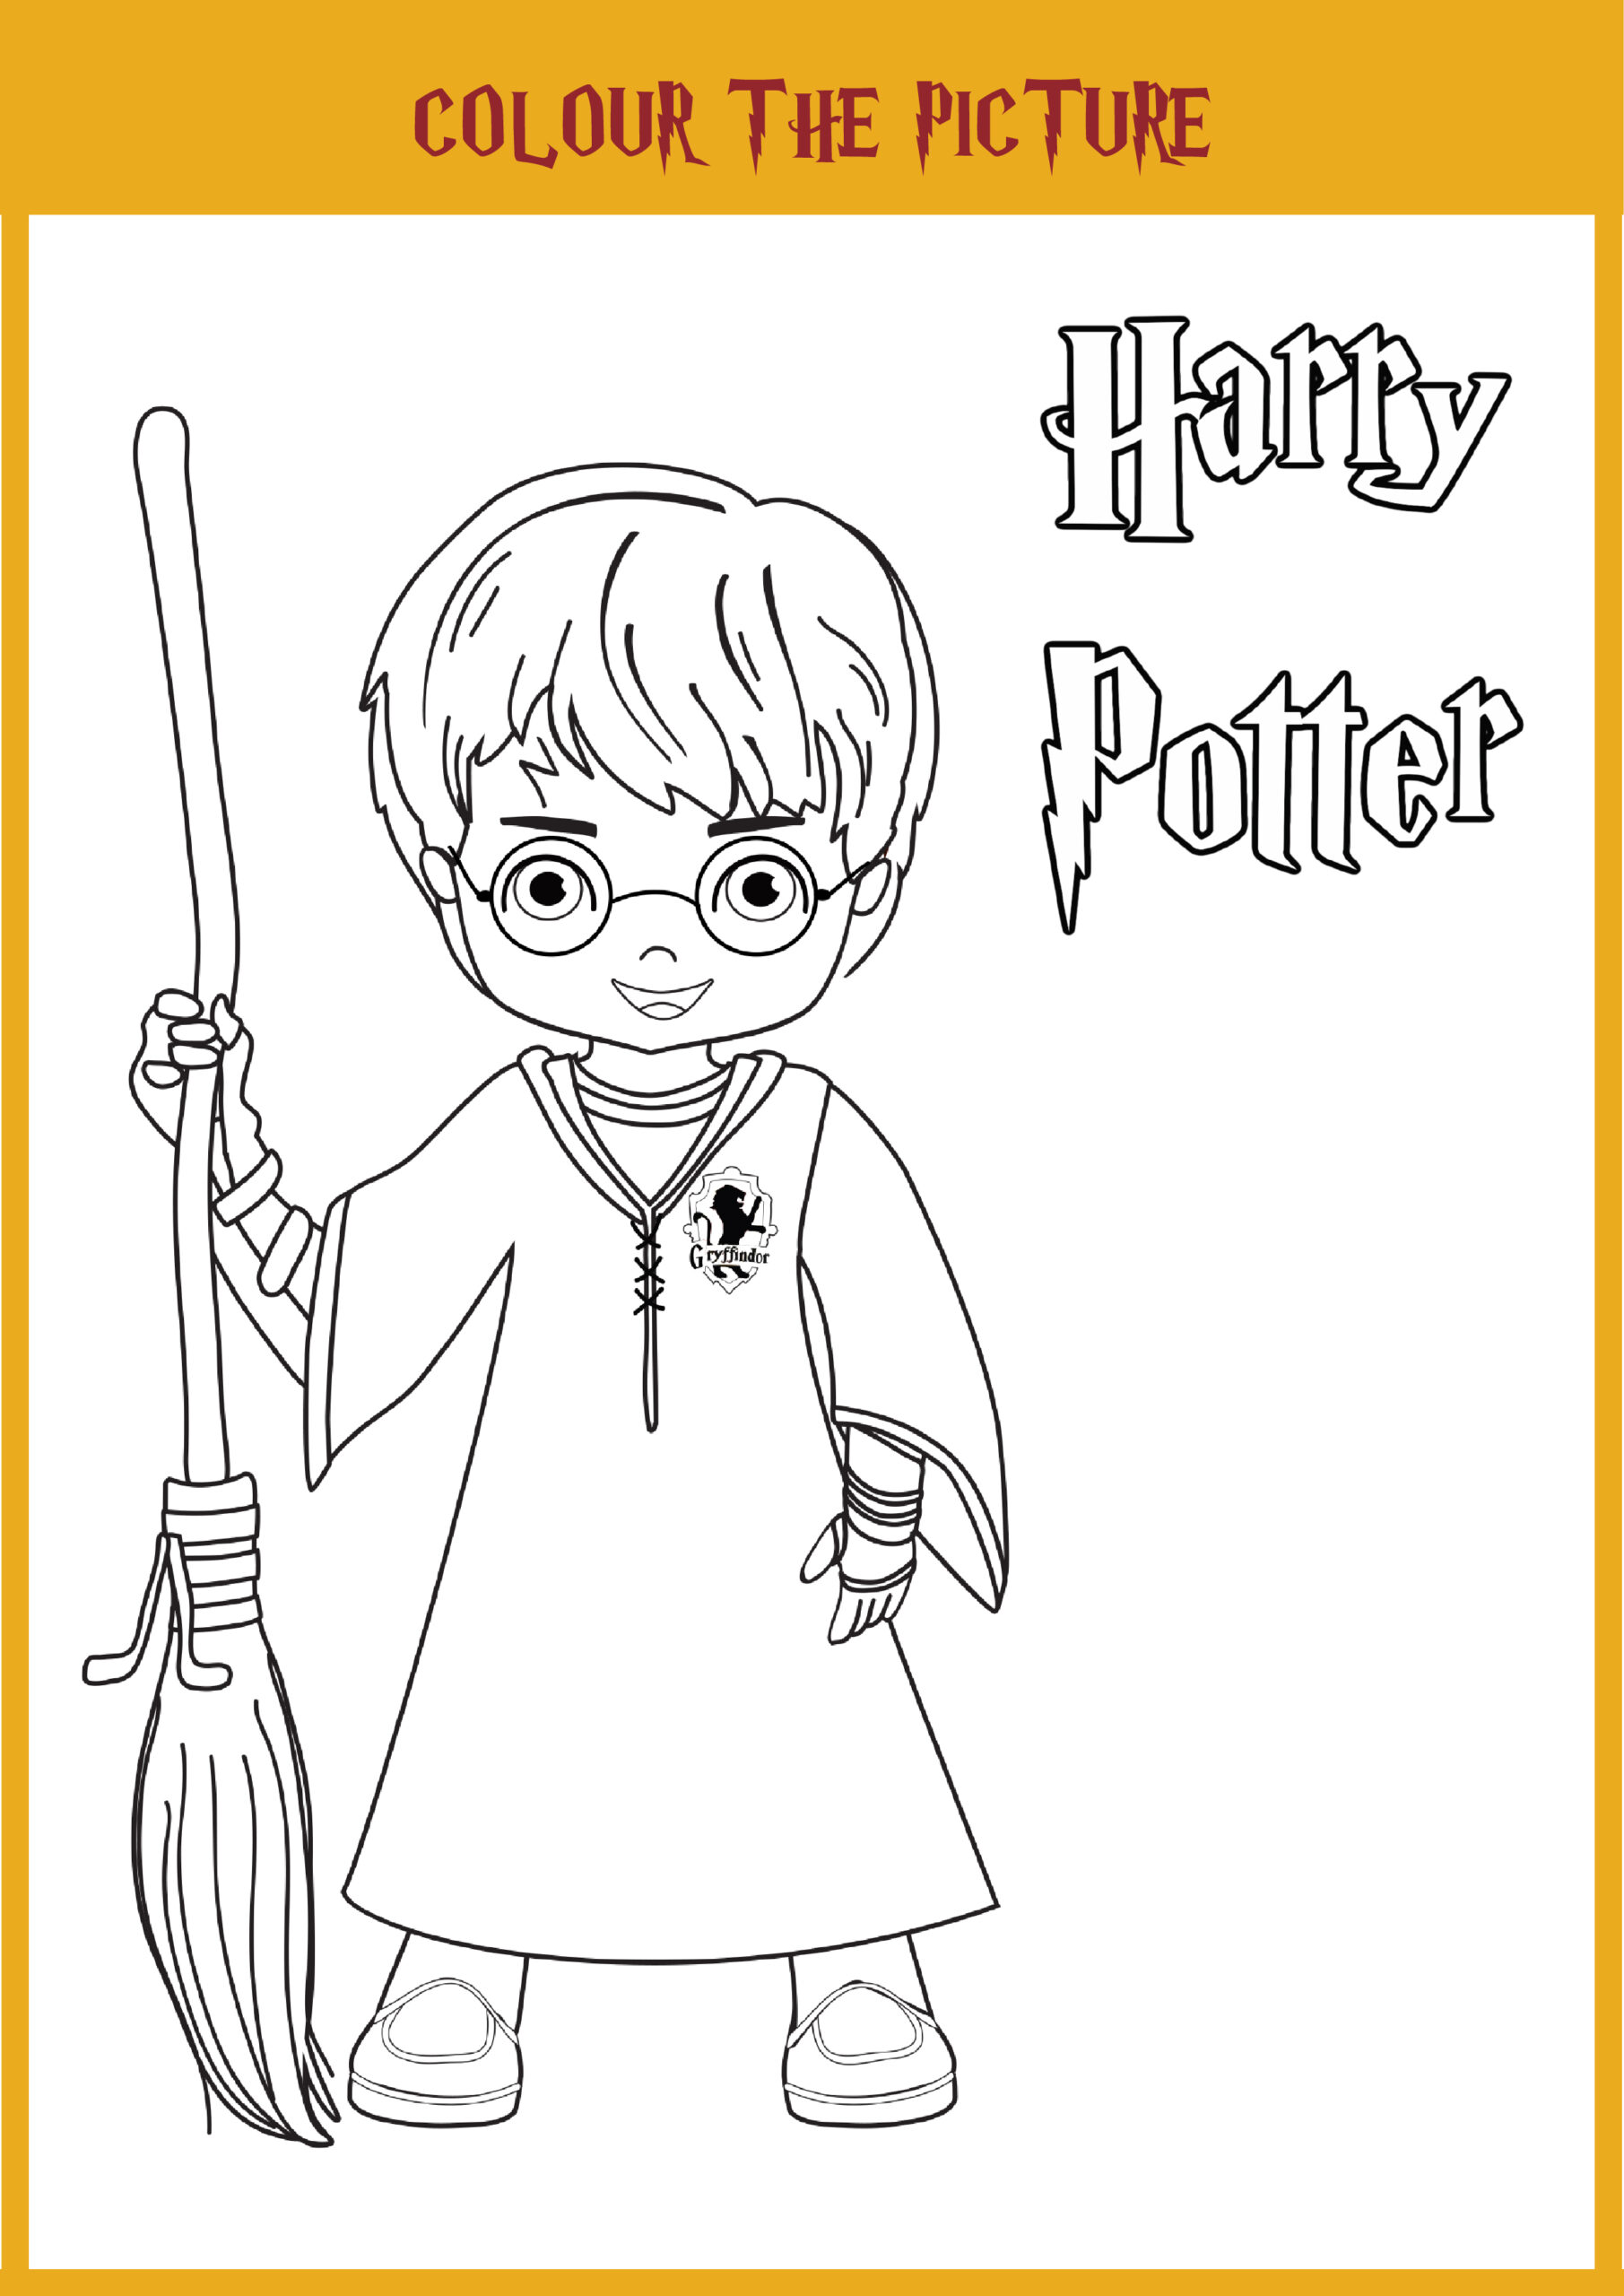 Harry potter colourg pages â the